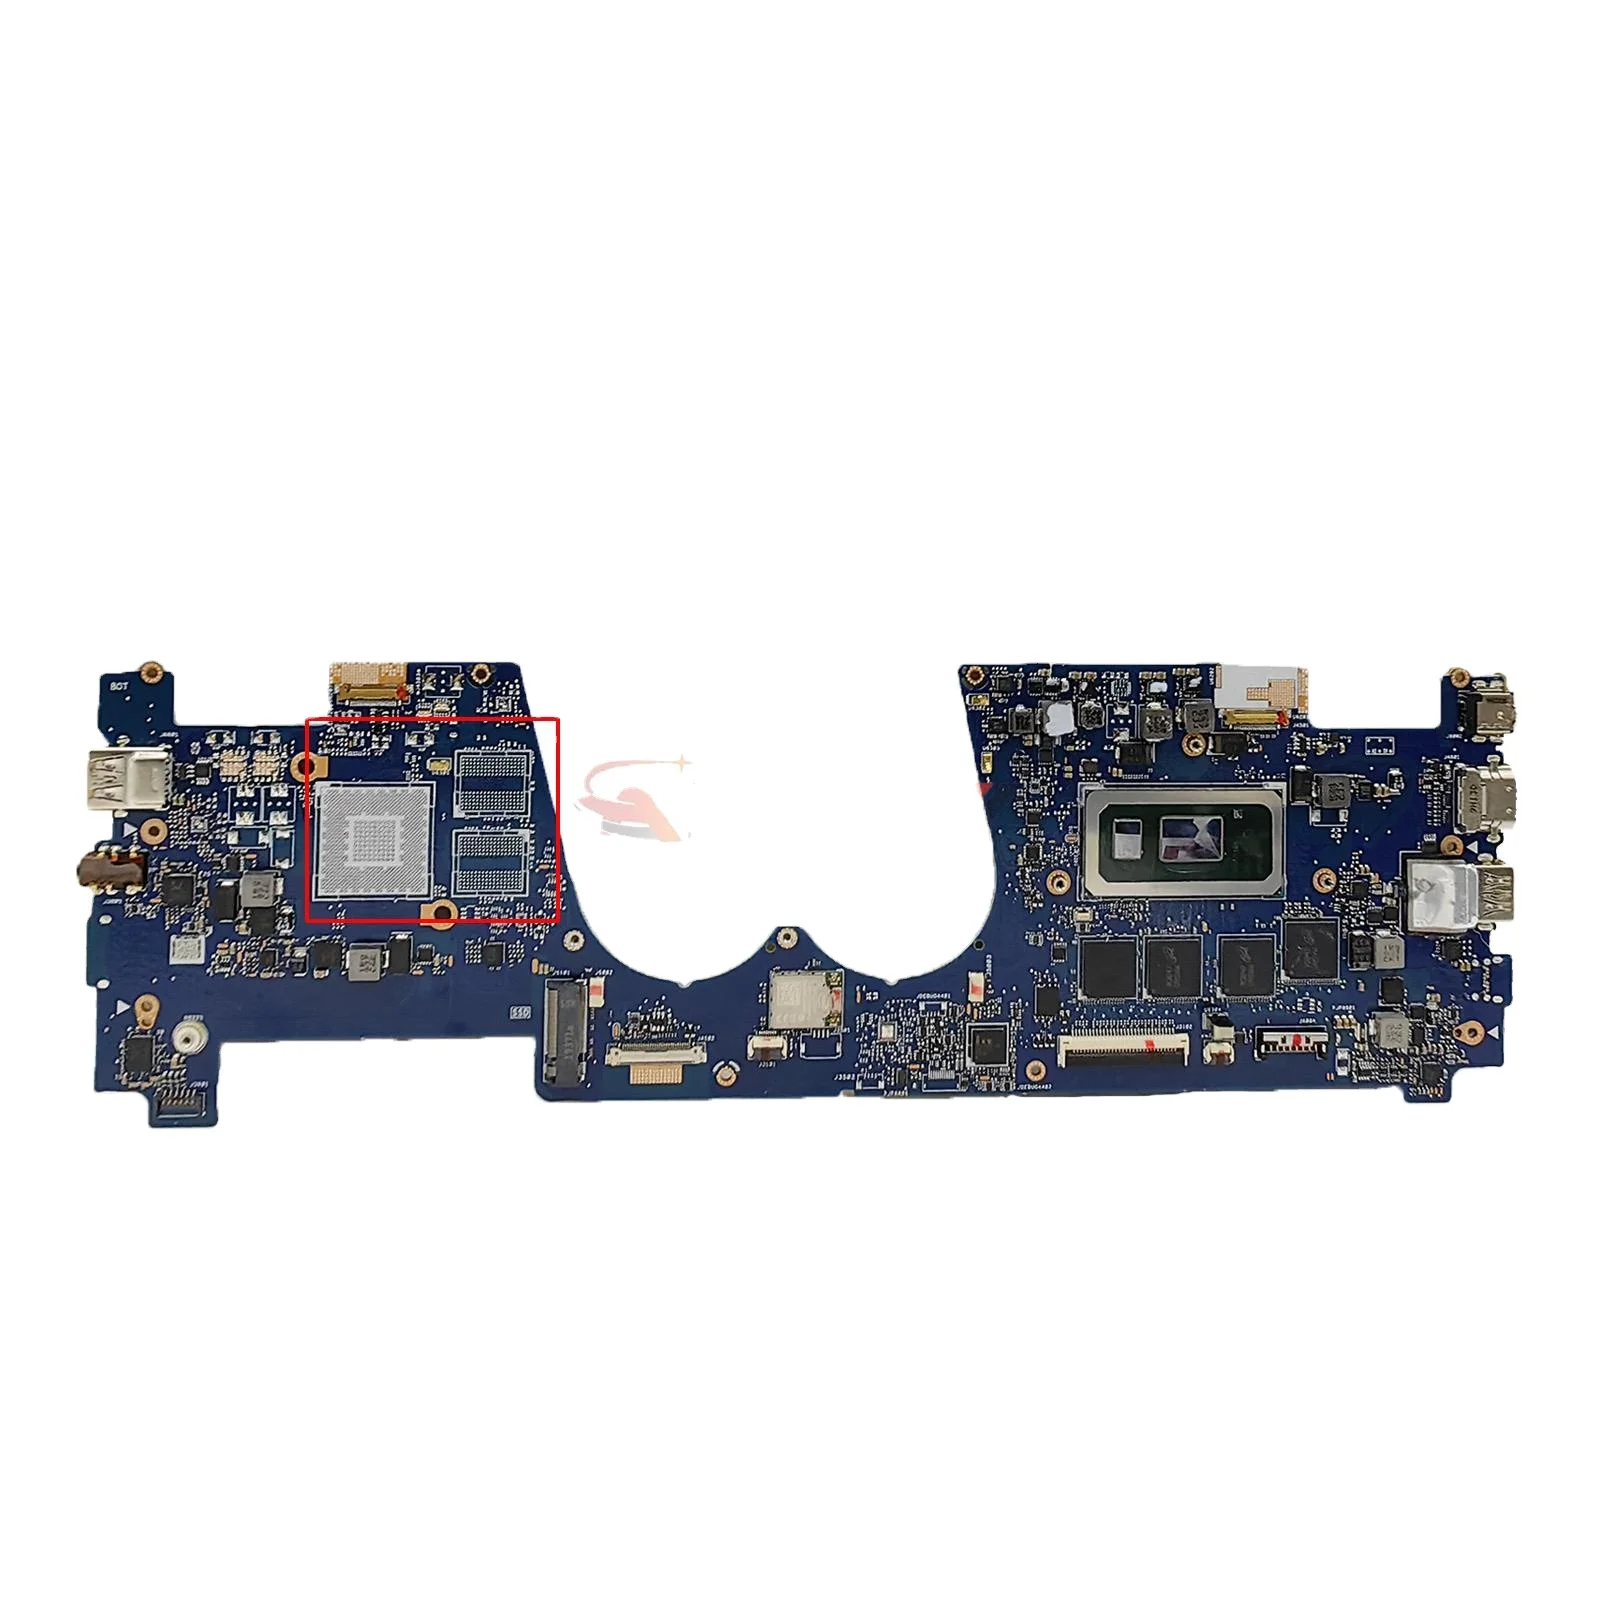 

UX481F Mainboard For ASUS Zenbook Duo UX481FA-DB71T UX481F UX481FL UX481FLY XS74T UX4000 Laptop Motherboard I5 I7 10th Gen